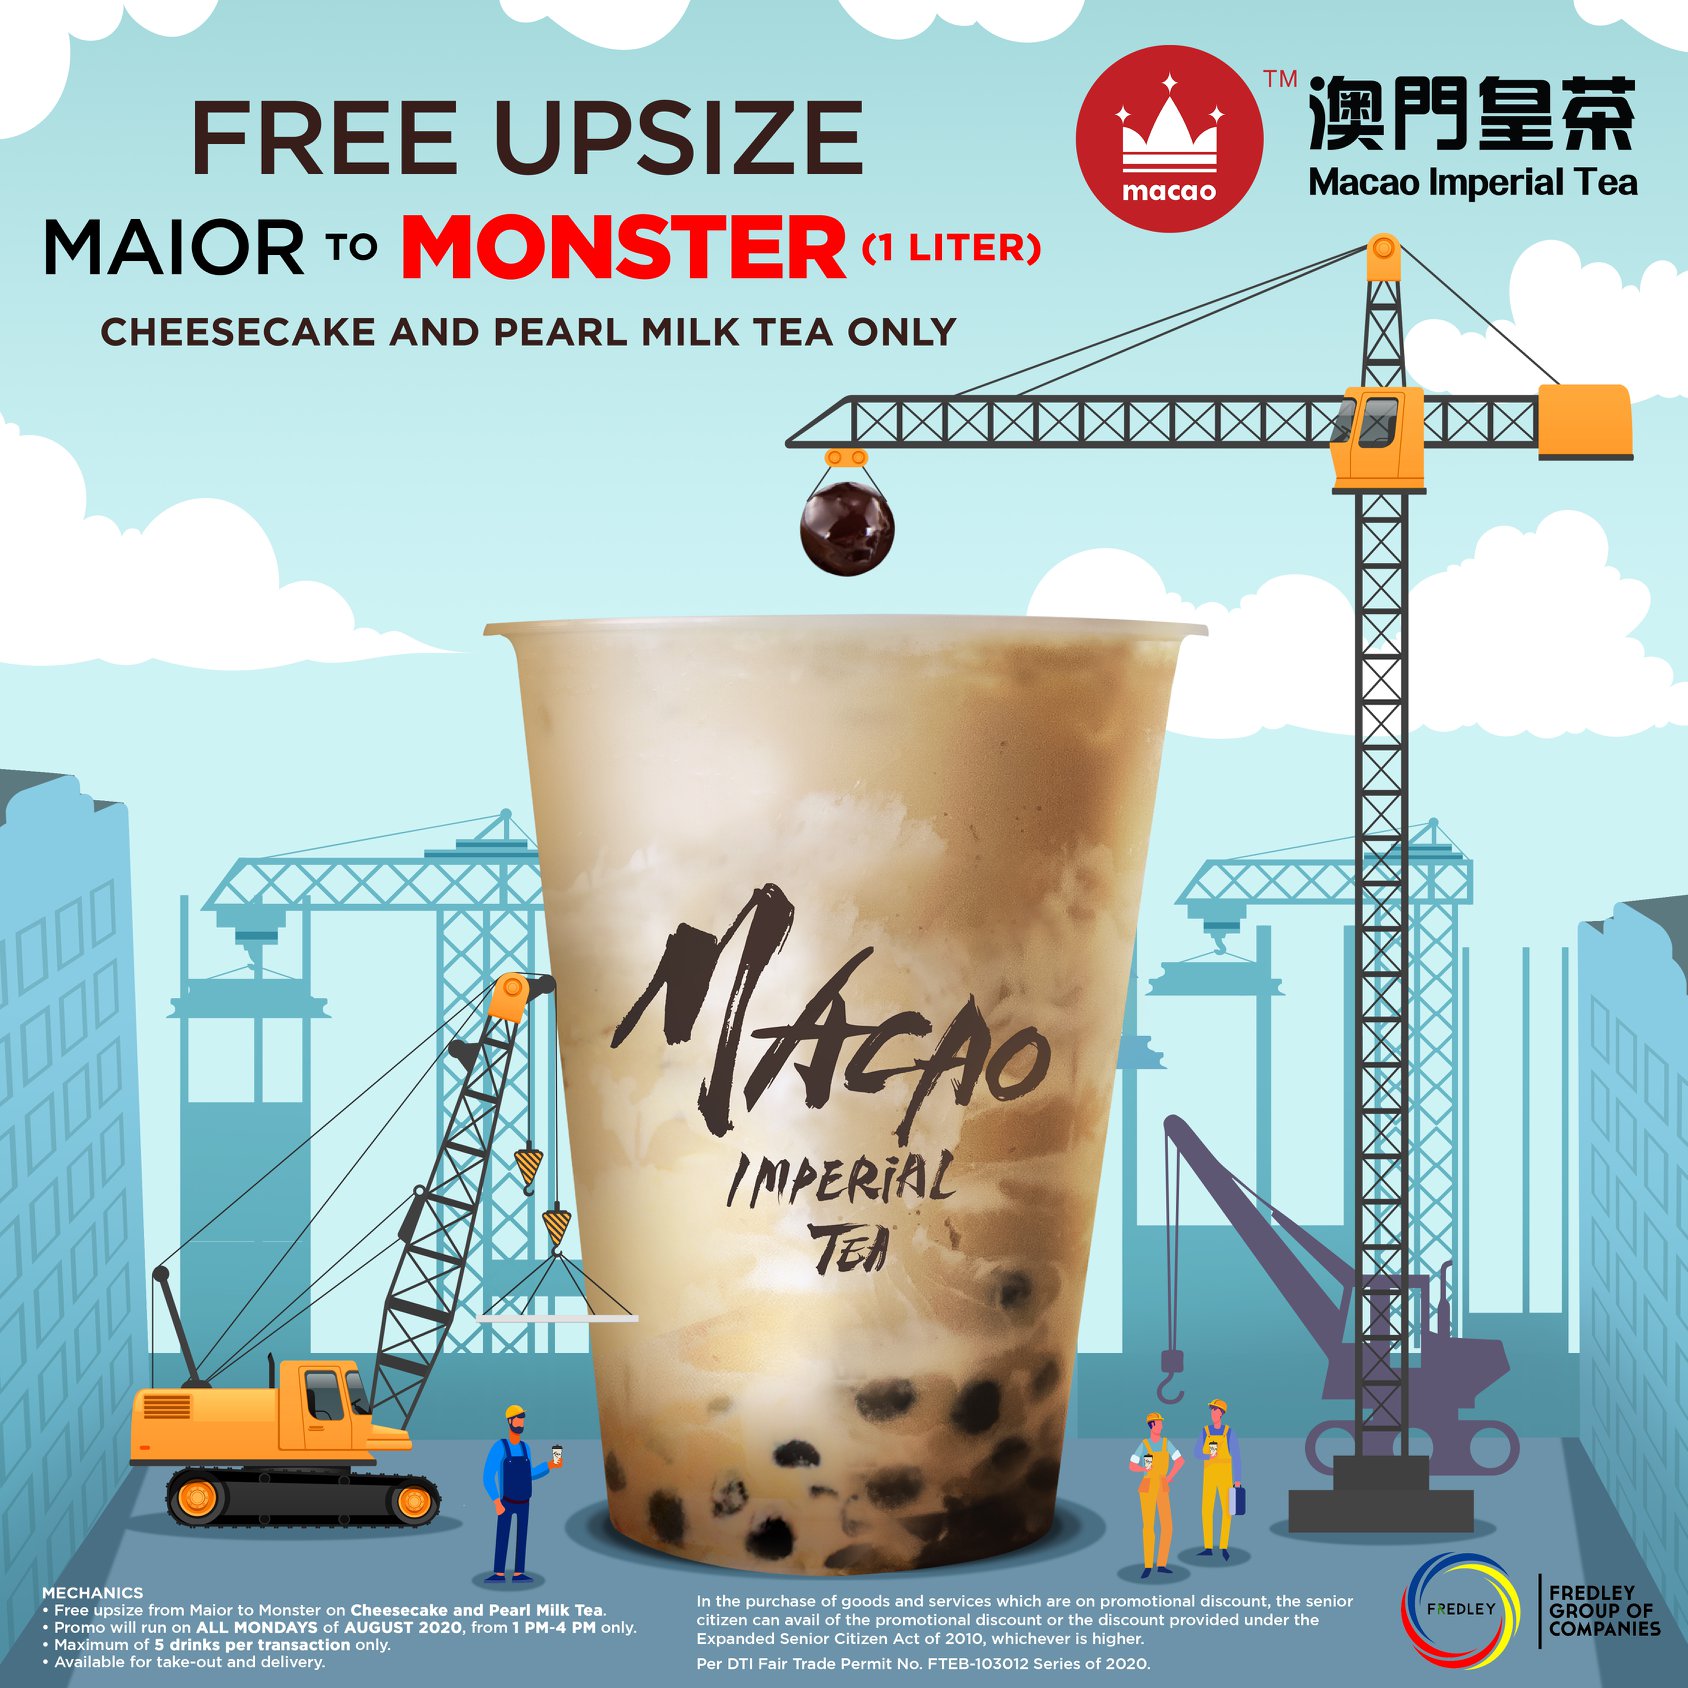 Macao Imperial Tea's Monster Mondays Promo